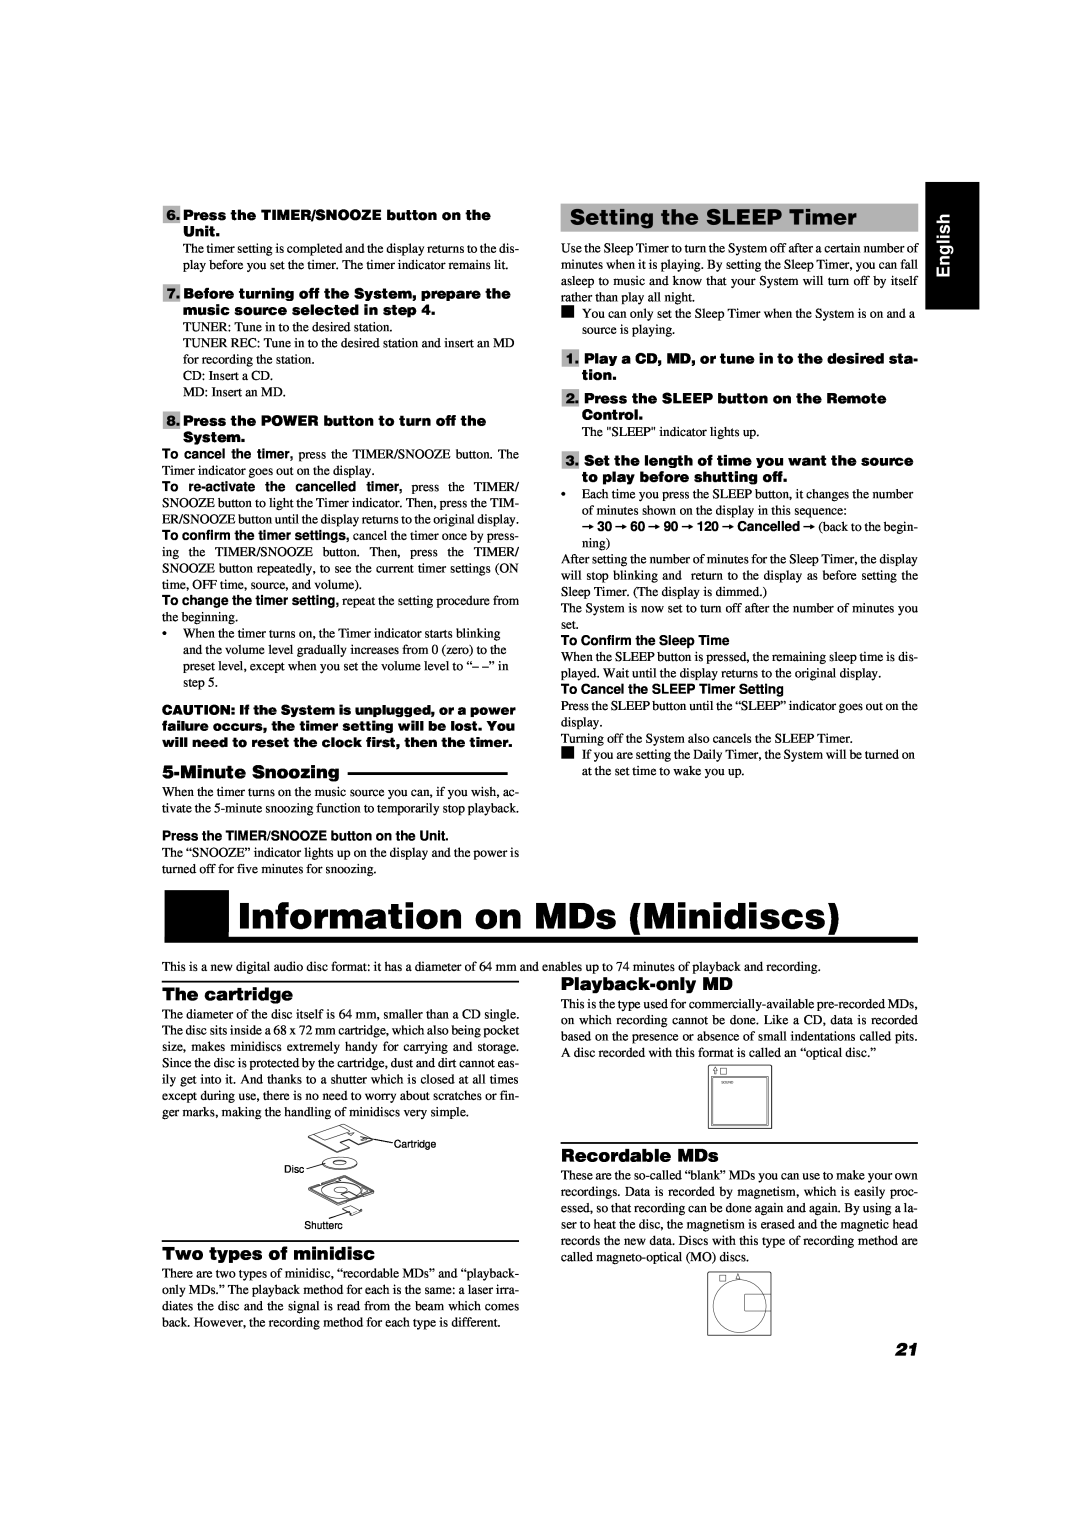 JVC FS-MD9000 manual Information on MDs Minidiscs, Setting the SLEEP Timer, MinuteSnoozing, The cartridge, Playback-onlyMD 